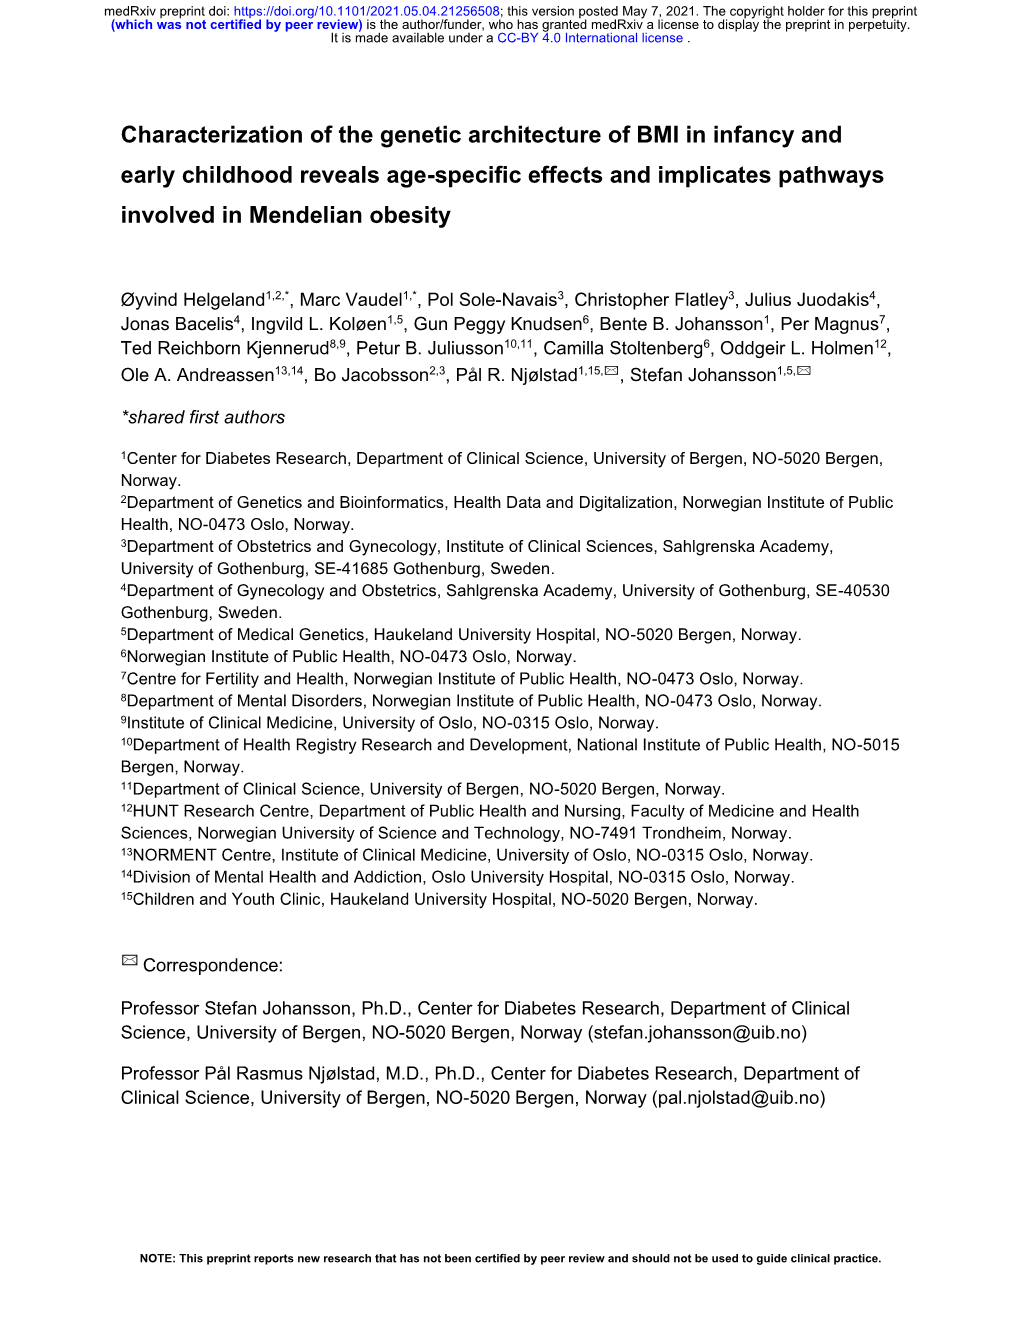 Characterization of the Genetic Architecture of BMI in Infancy and Early Childhood Reveals Age-Specific Effects and Implicates Pathways Involved in Mendelian Obesity